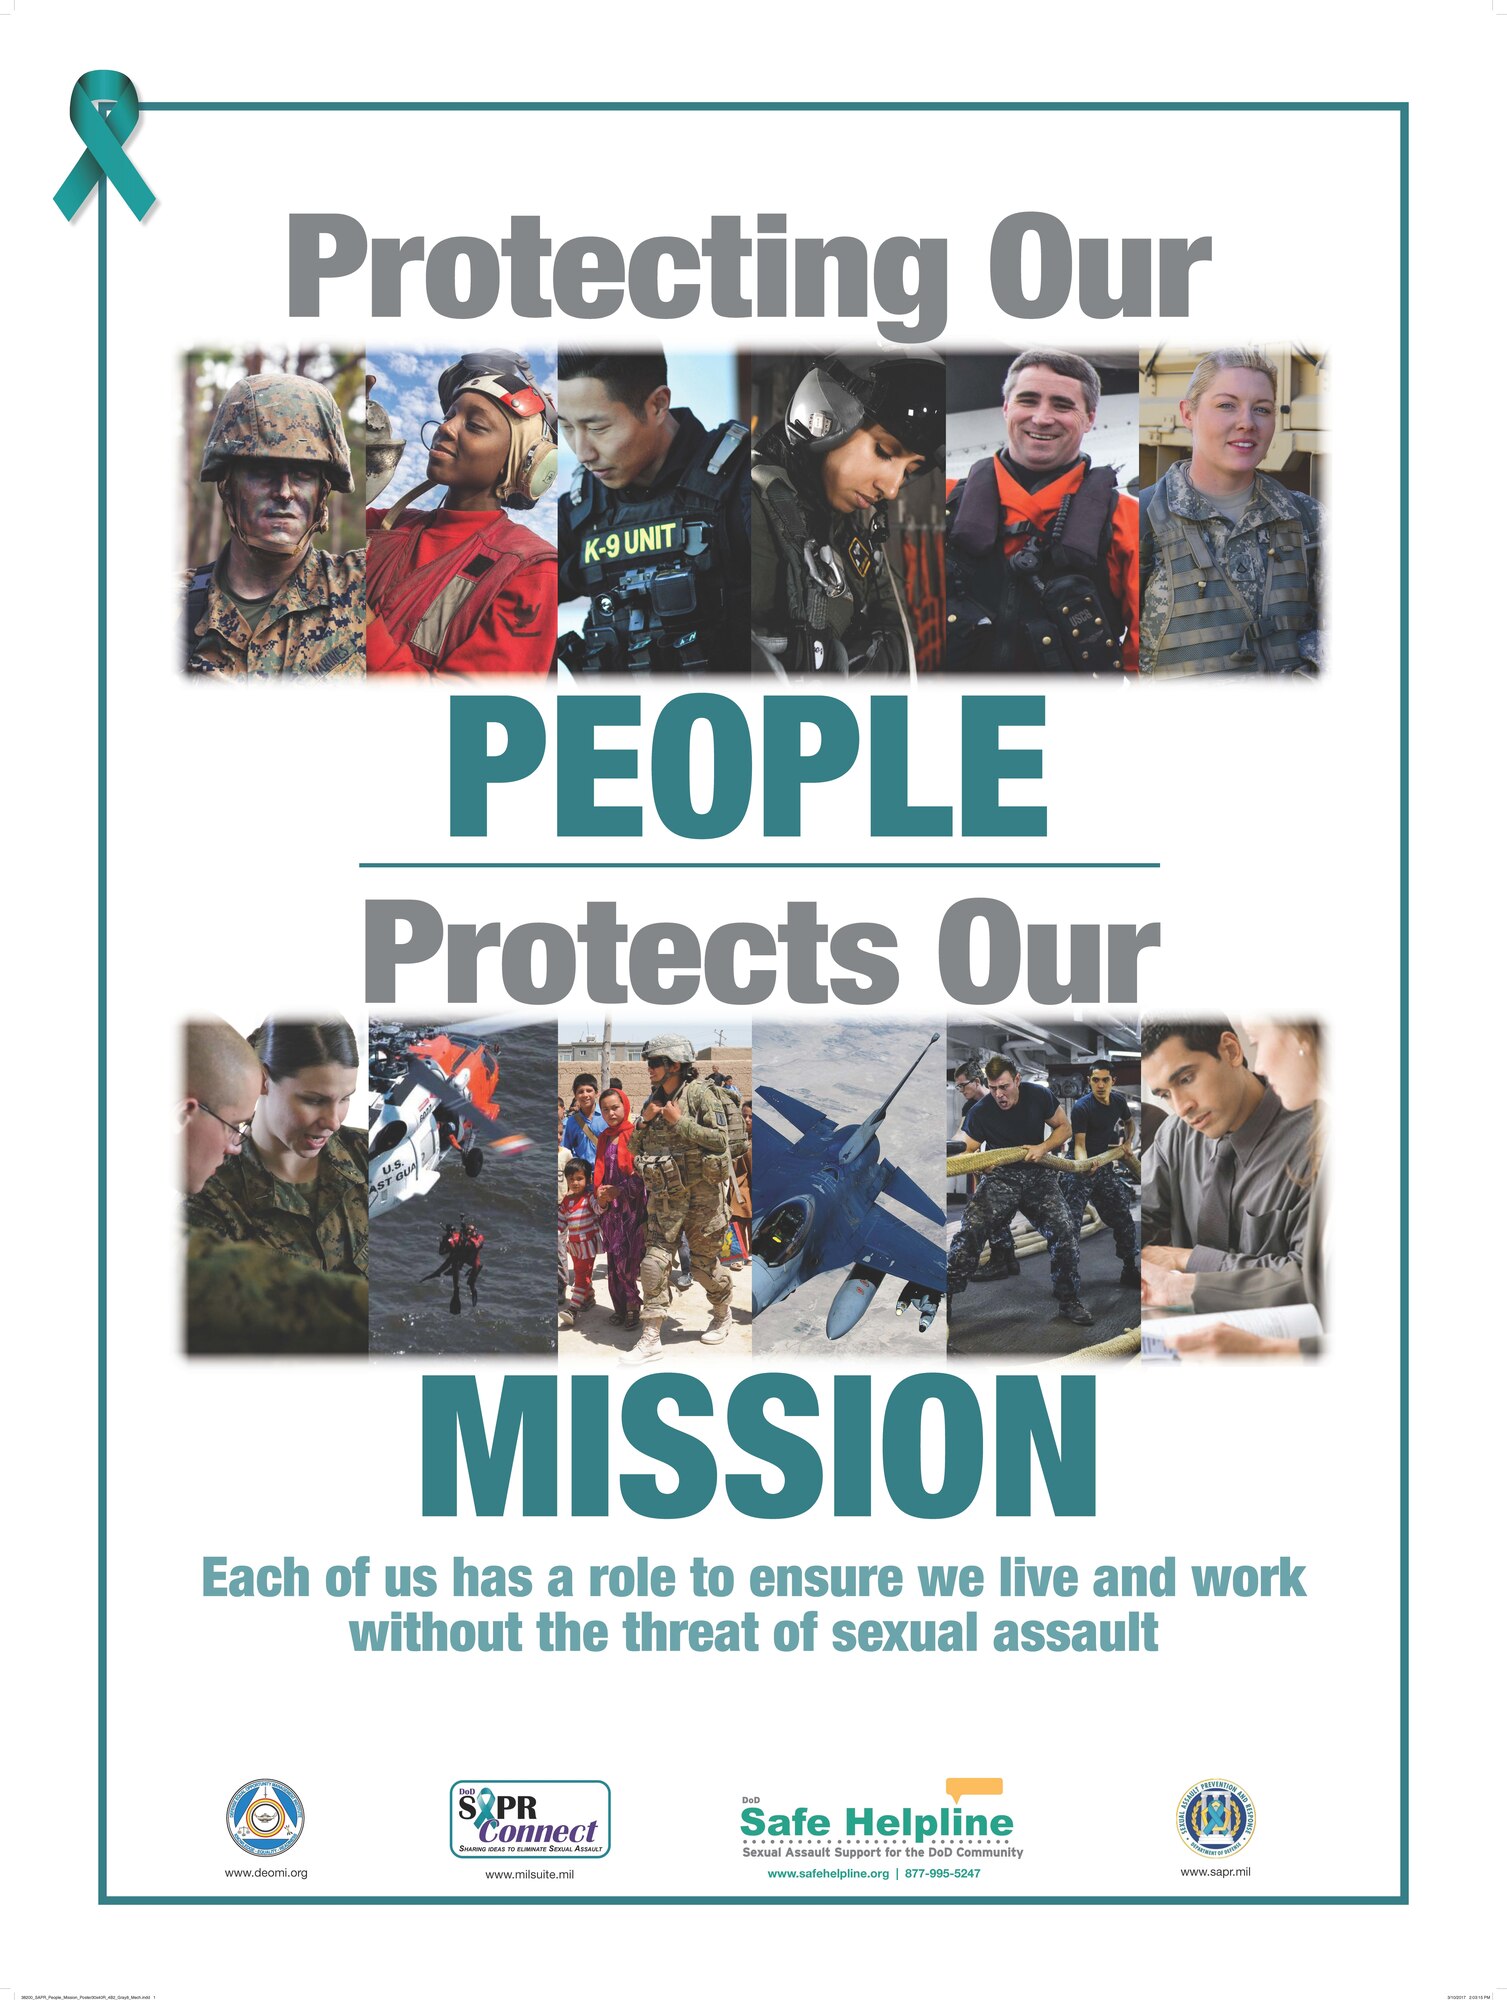 Protecting our people protects our mission graphic for sexual assault awareness and prevention month